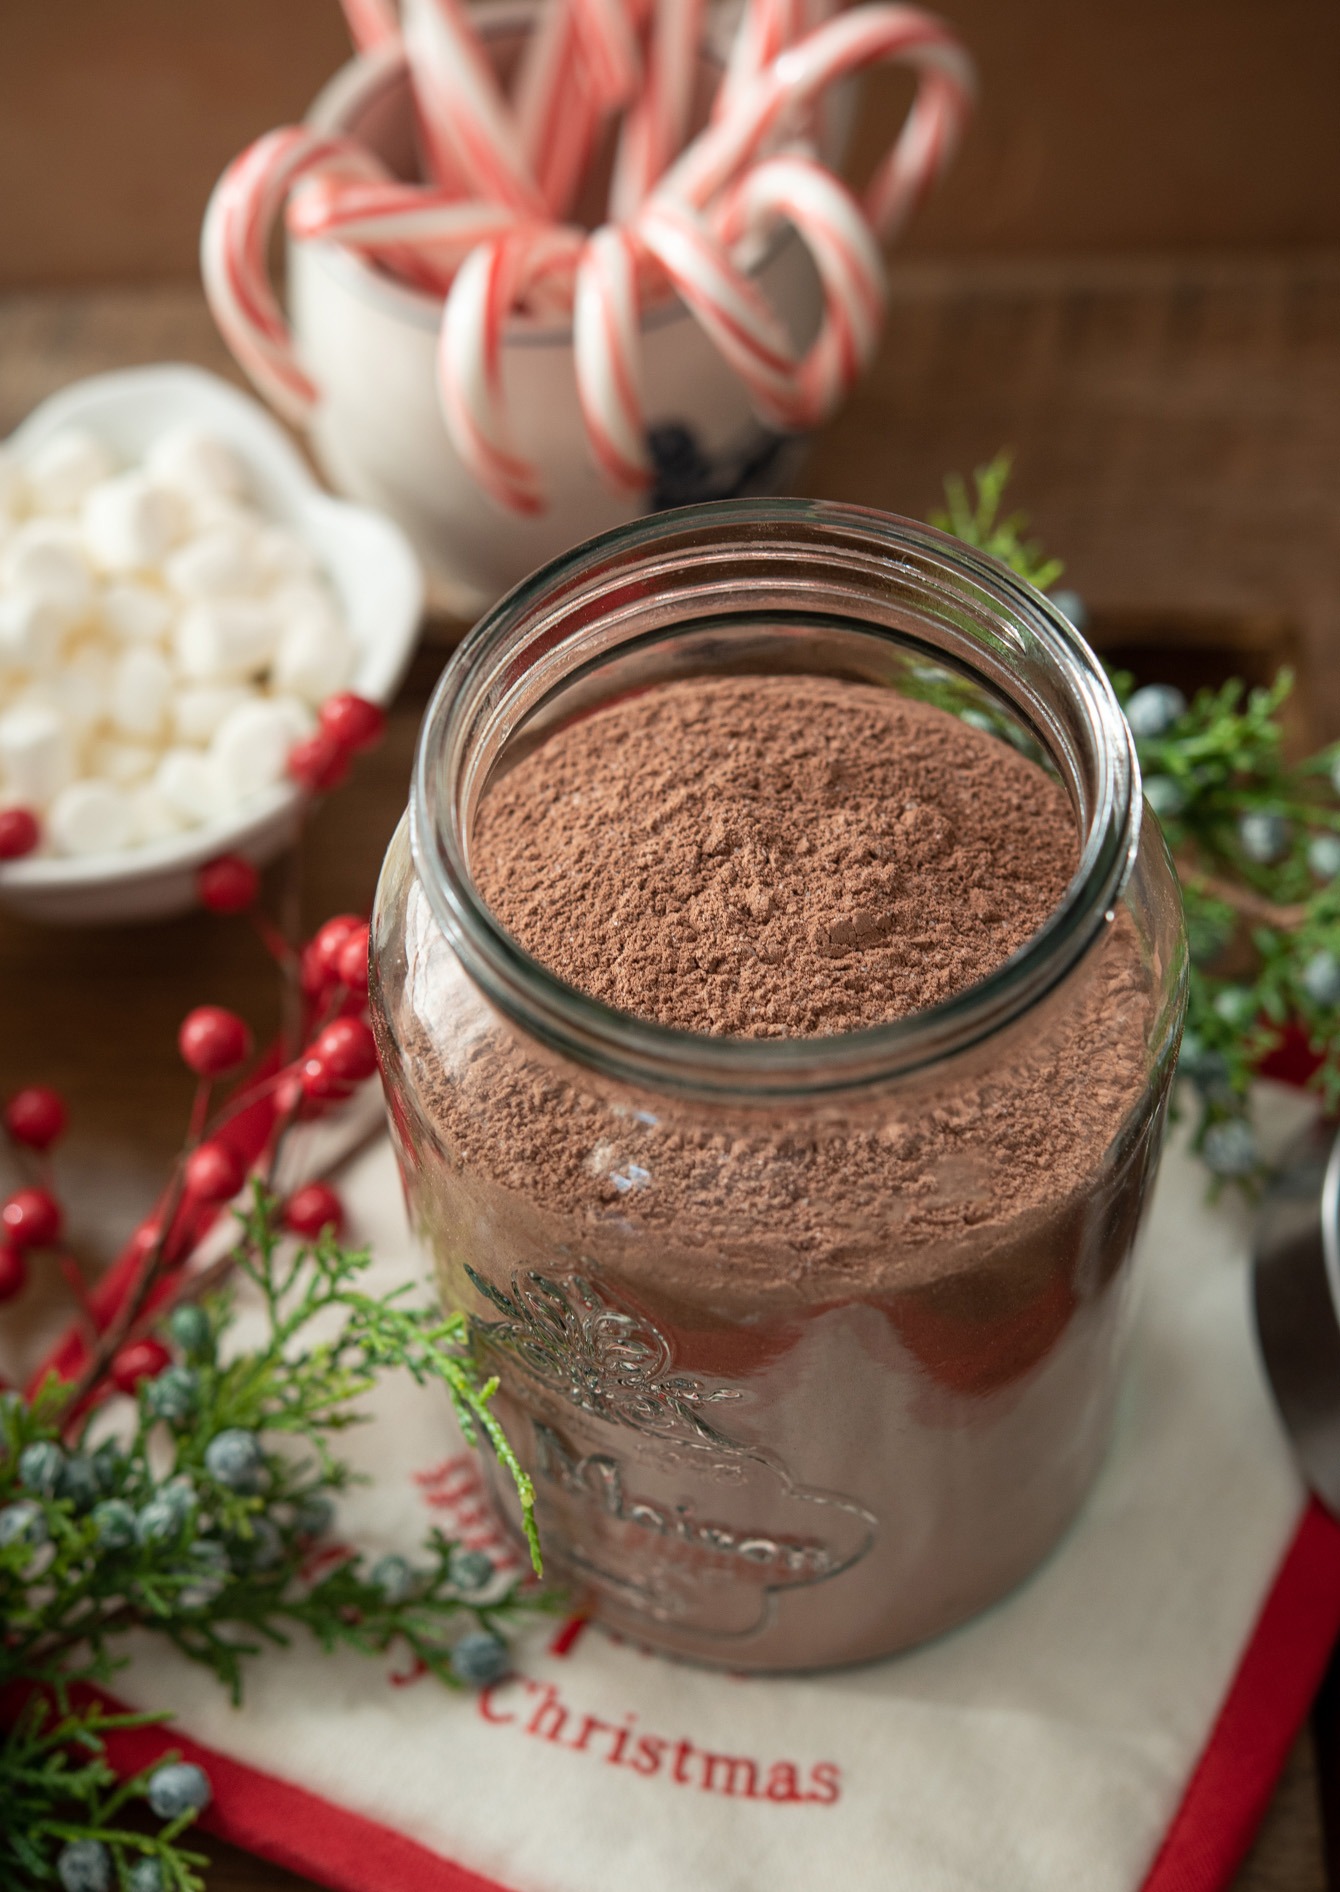 Homemade hot cocoa mix in a glass jar.